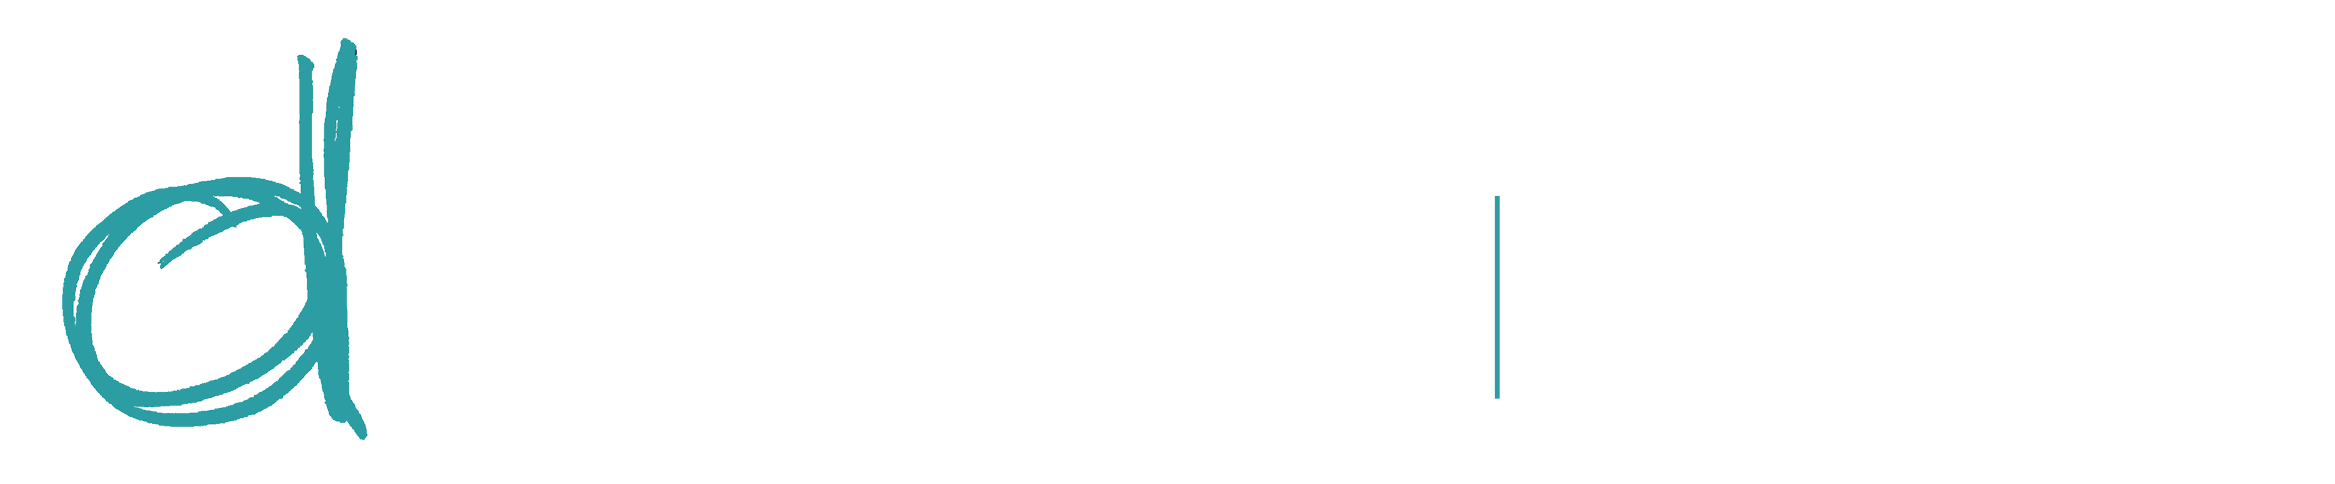 DETRITUS - Multidisciplinary journal for Waste Resources and Residues